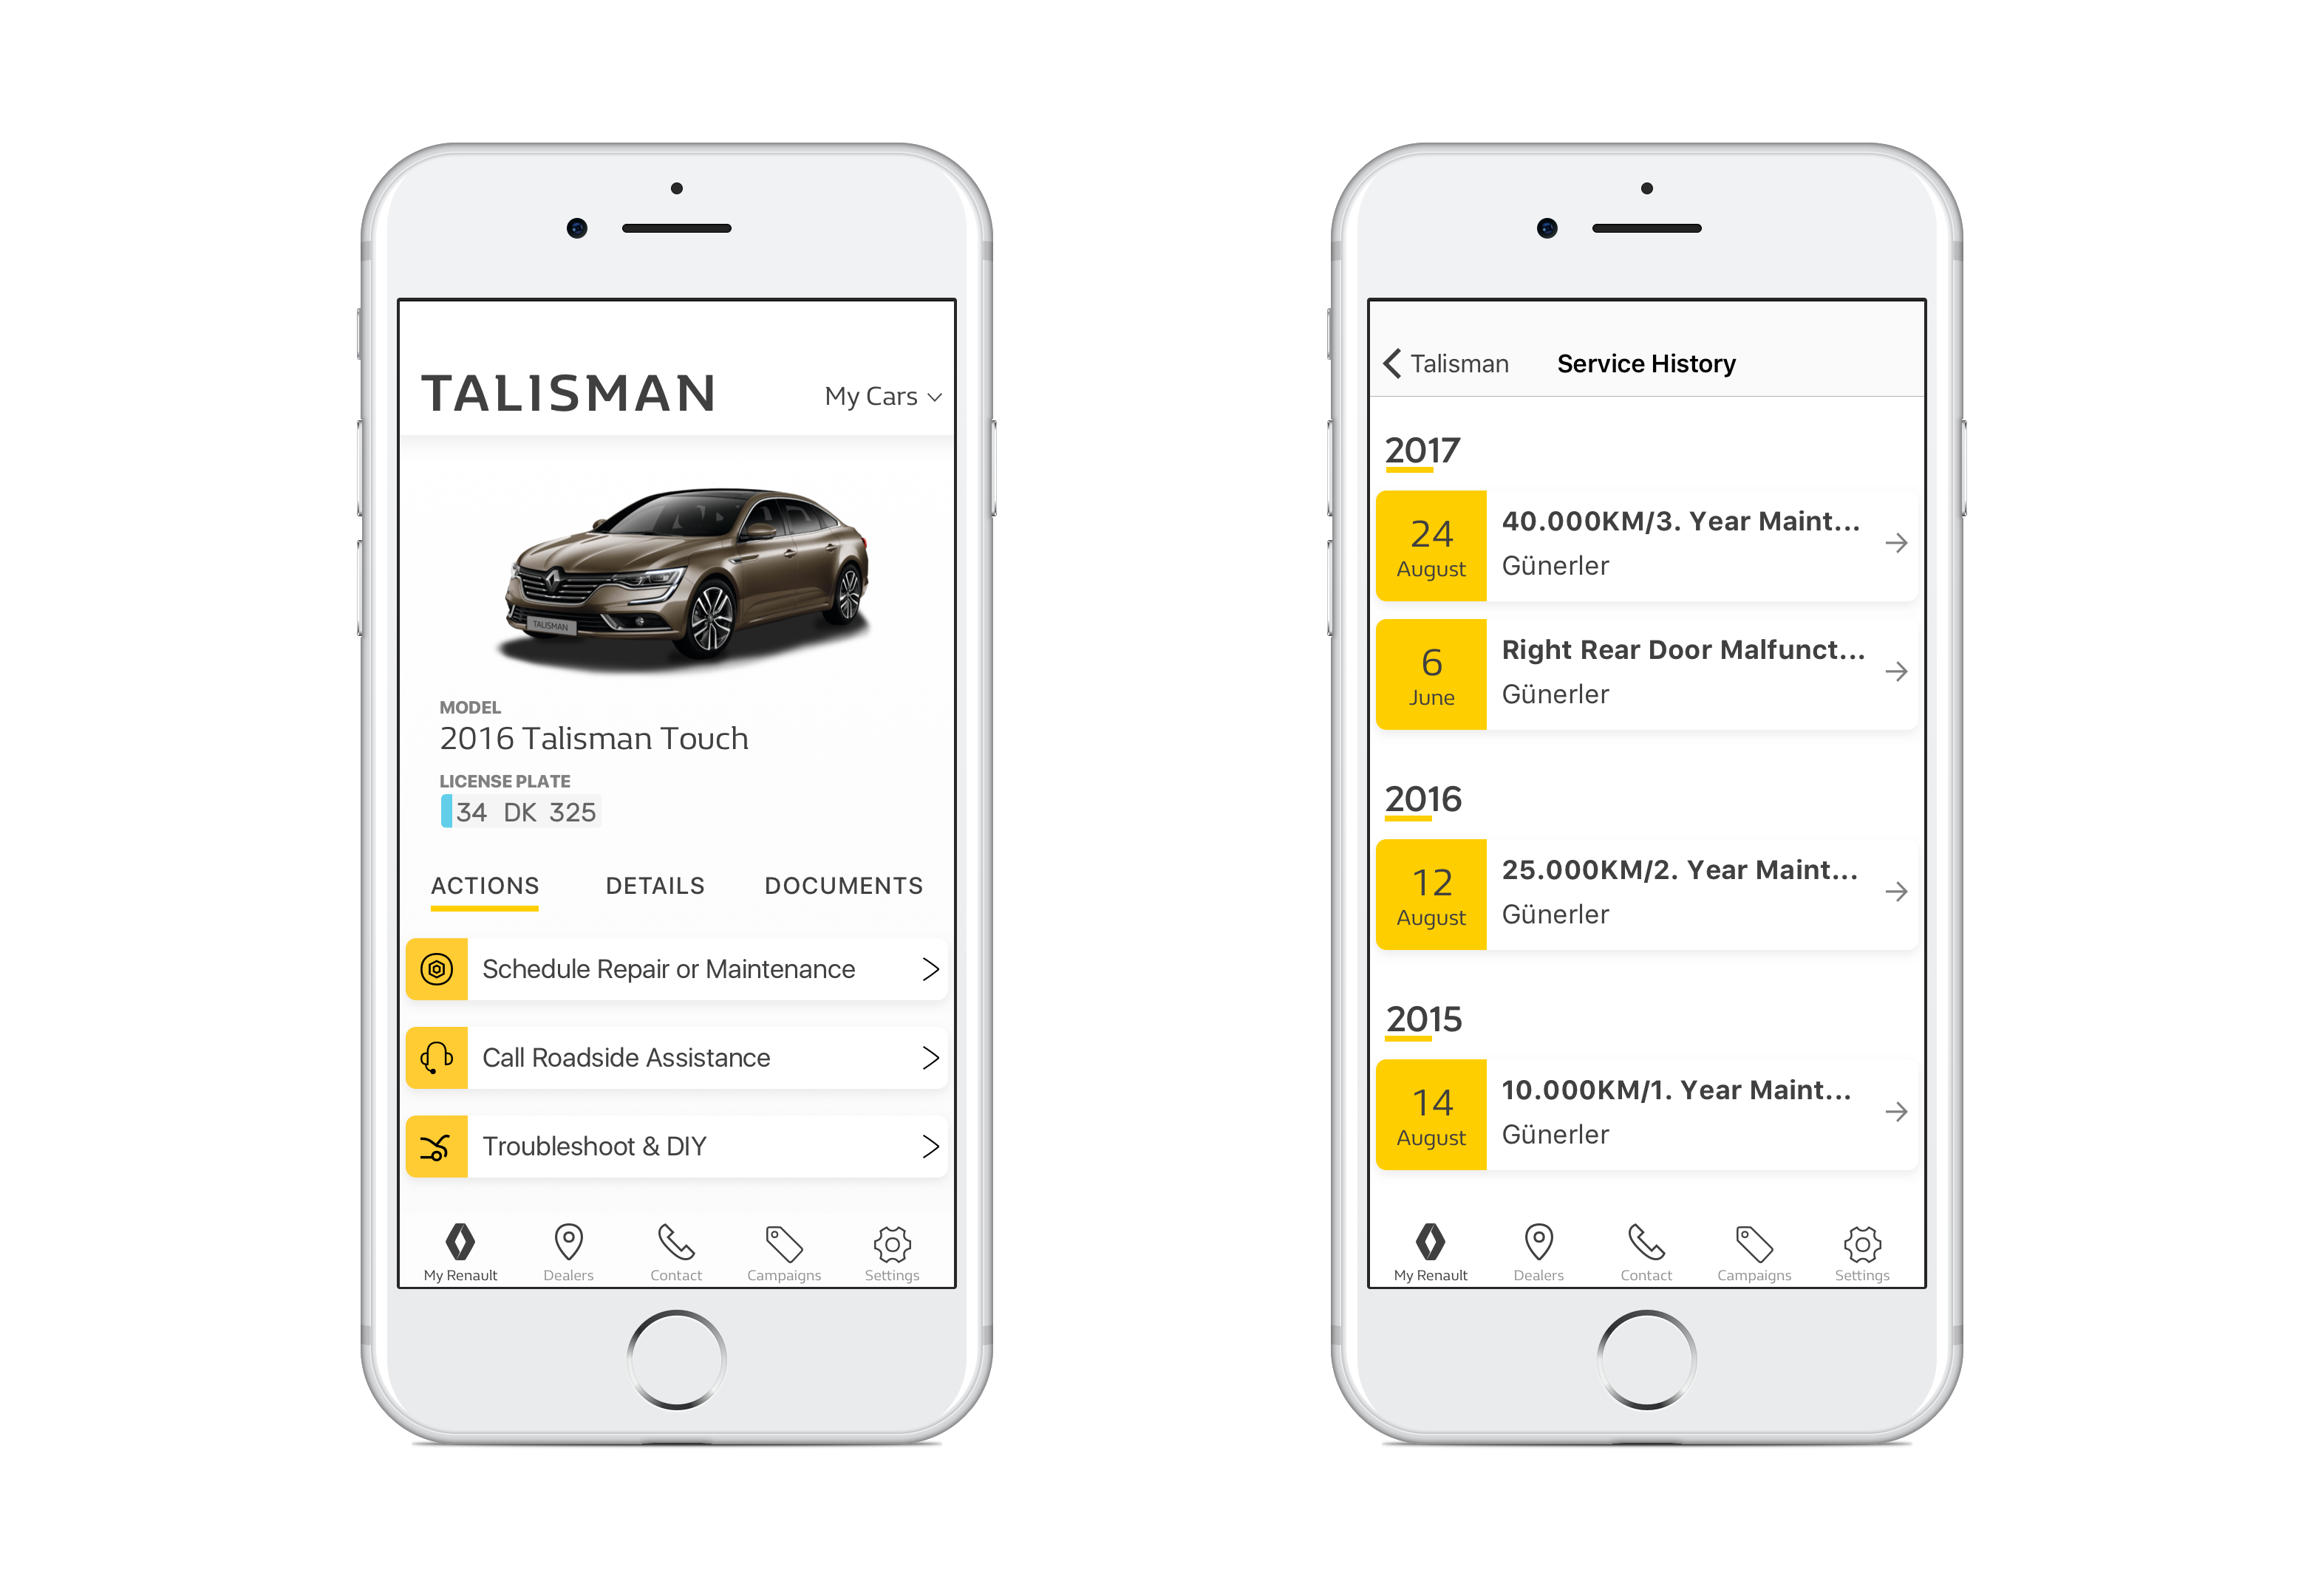 Sample screens from the app, showing the dashboard and a list of previous maintenance records.